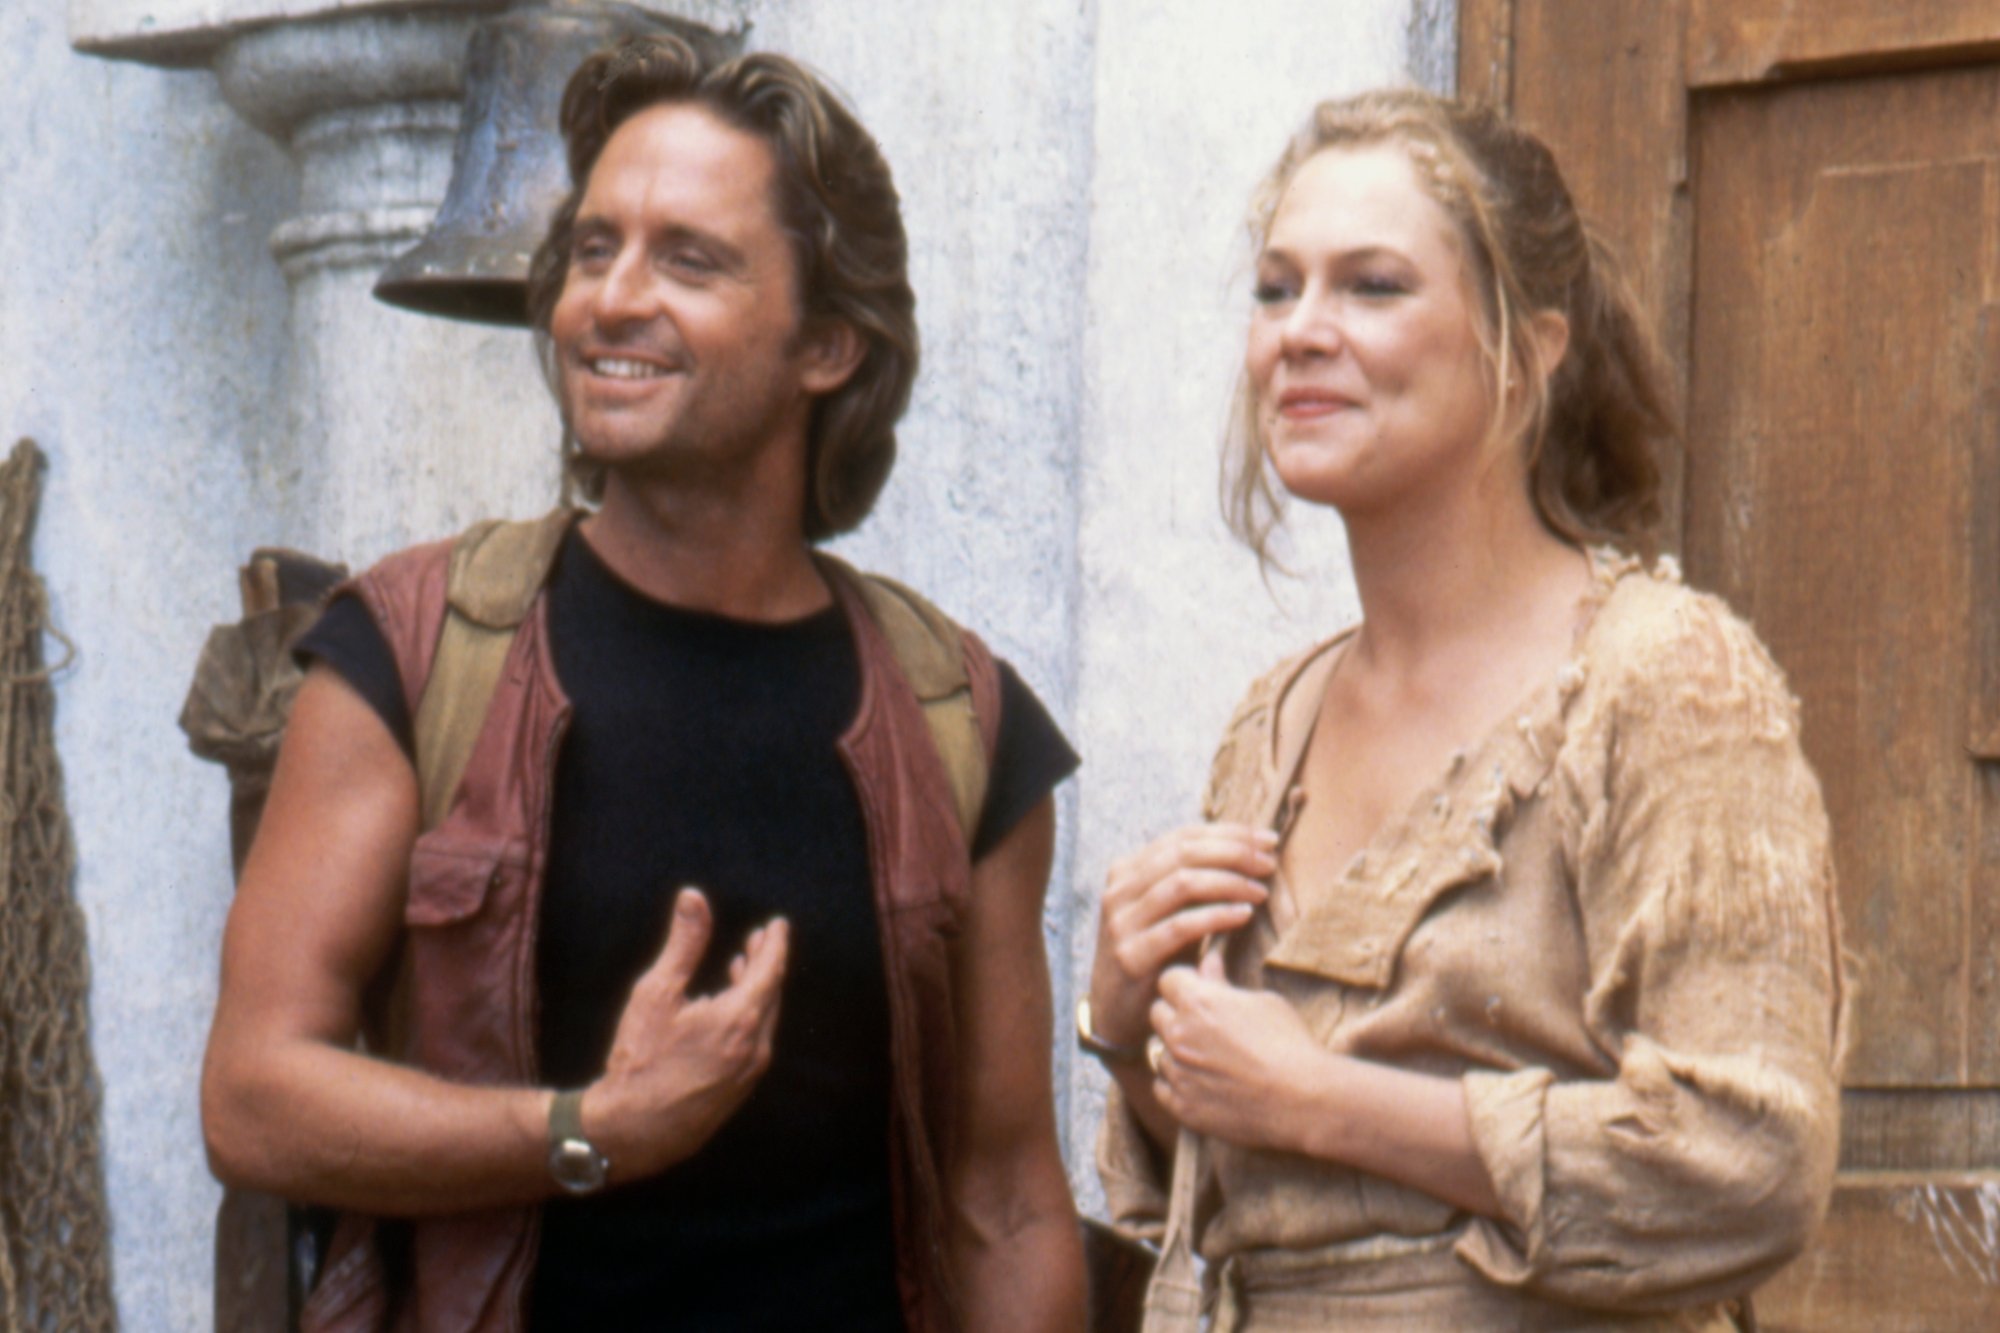 'Romancing the Stone' Michael Douglas as Jack Colton and Kathleen Turner as Joan Wilder. They're smiling in brown adventuring clothing in front of a white wall.